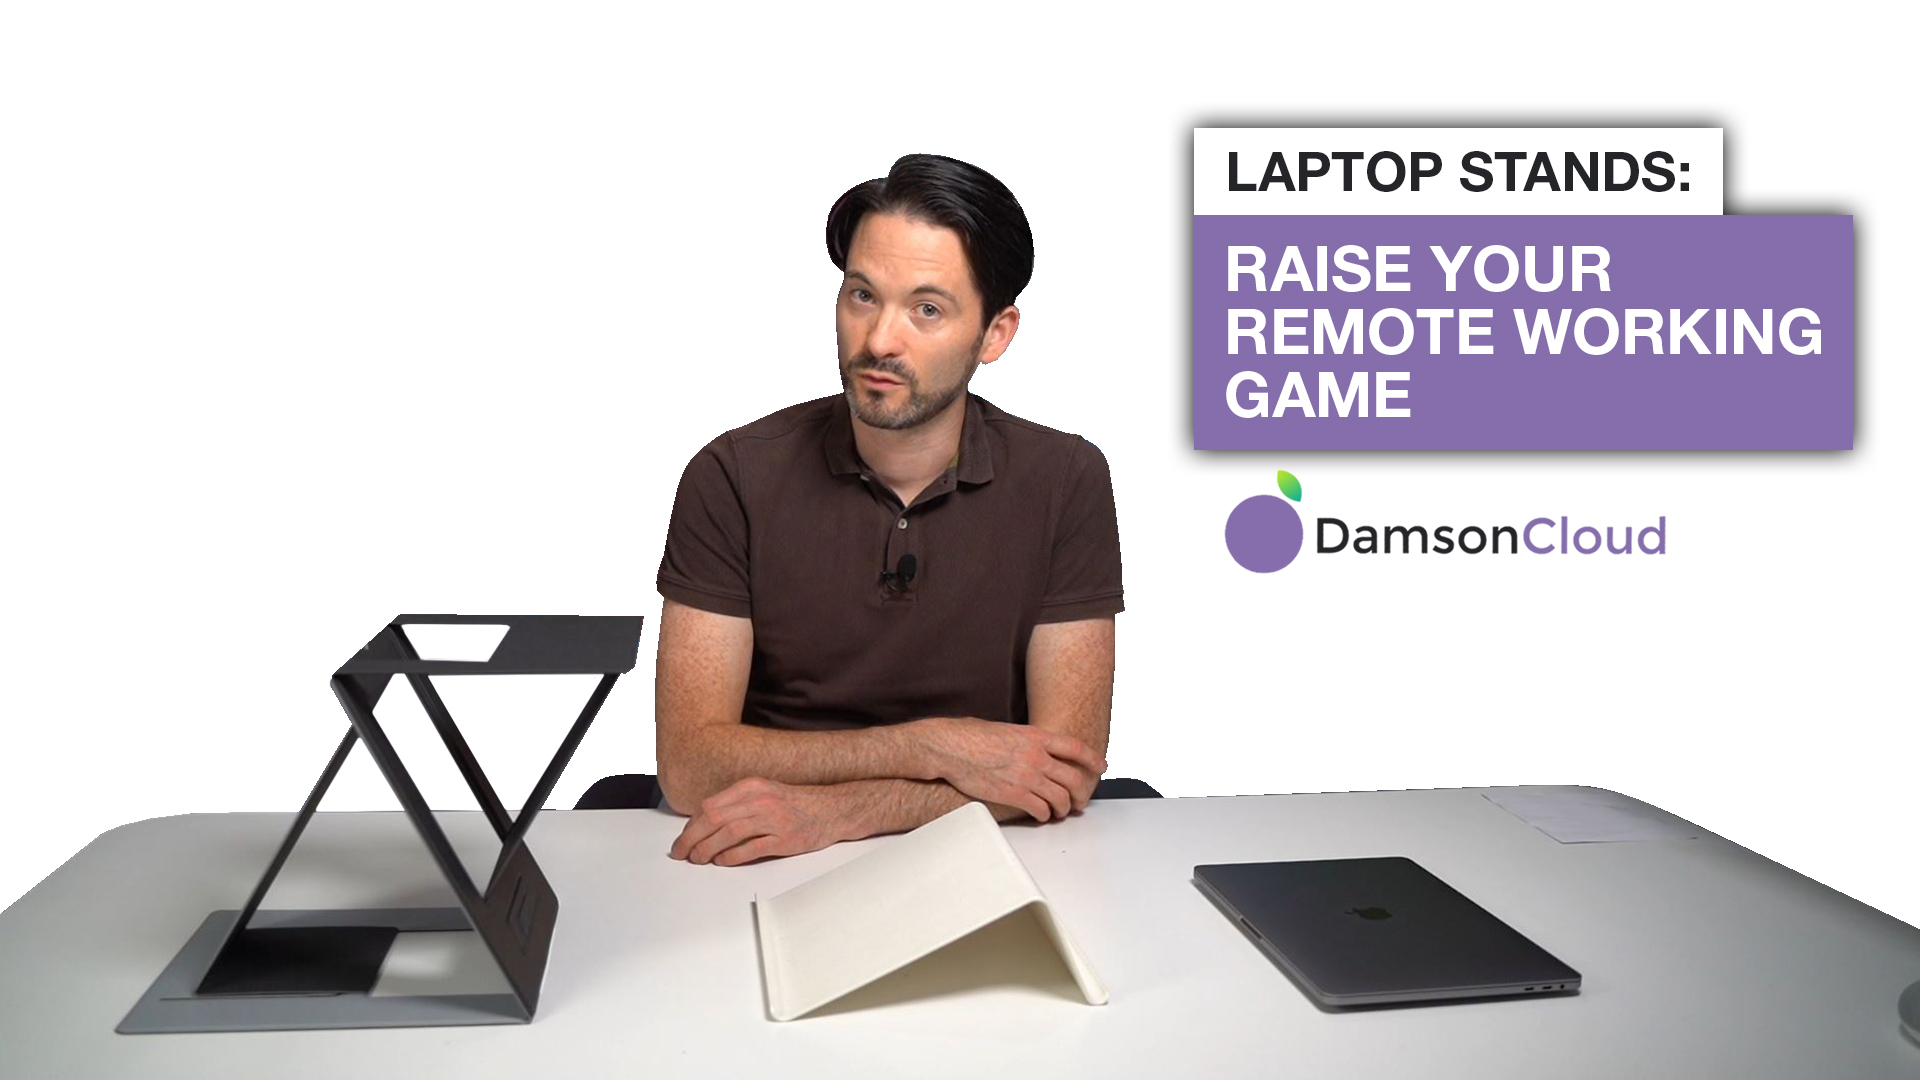 Laptop Stands: Raise Your Remote Working Game